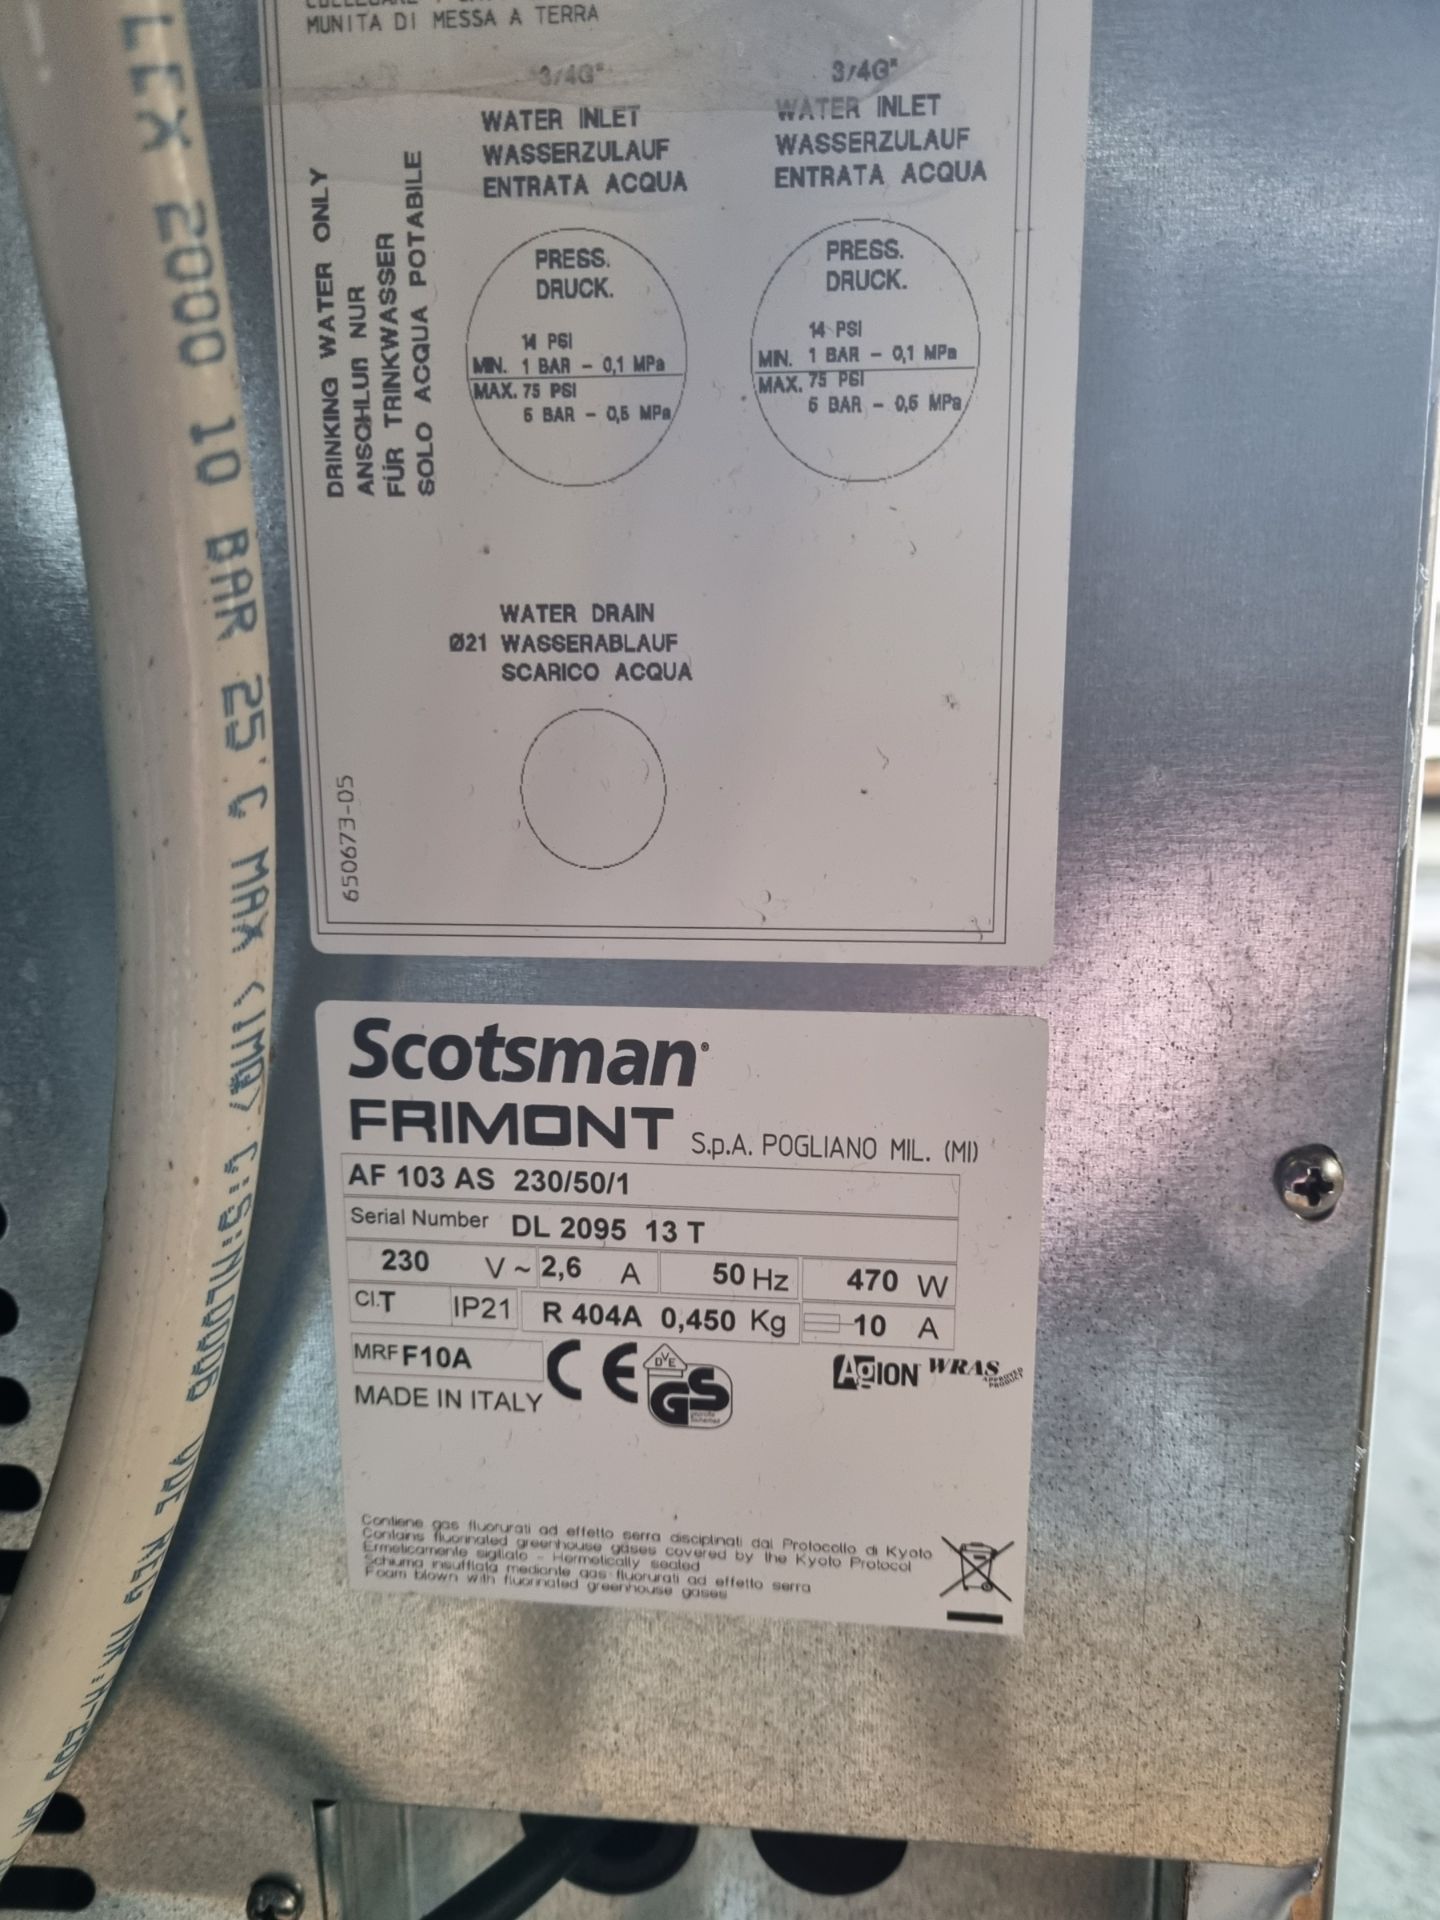 Scotsman Af 103 self contained Ice machine, 250V - L60 x W62 x H112cm - Image 6 of 6